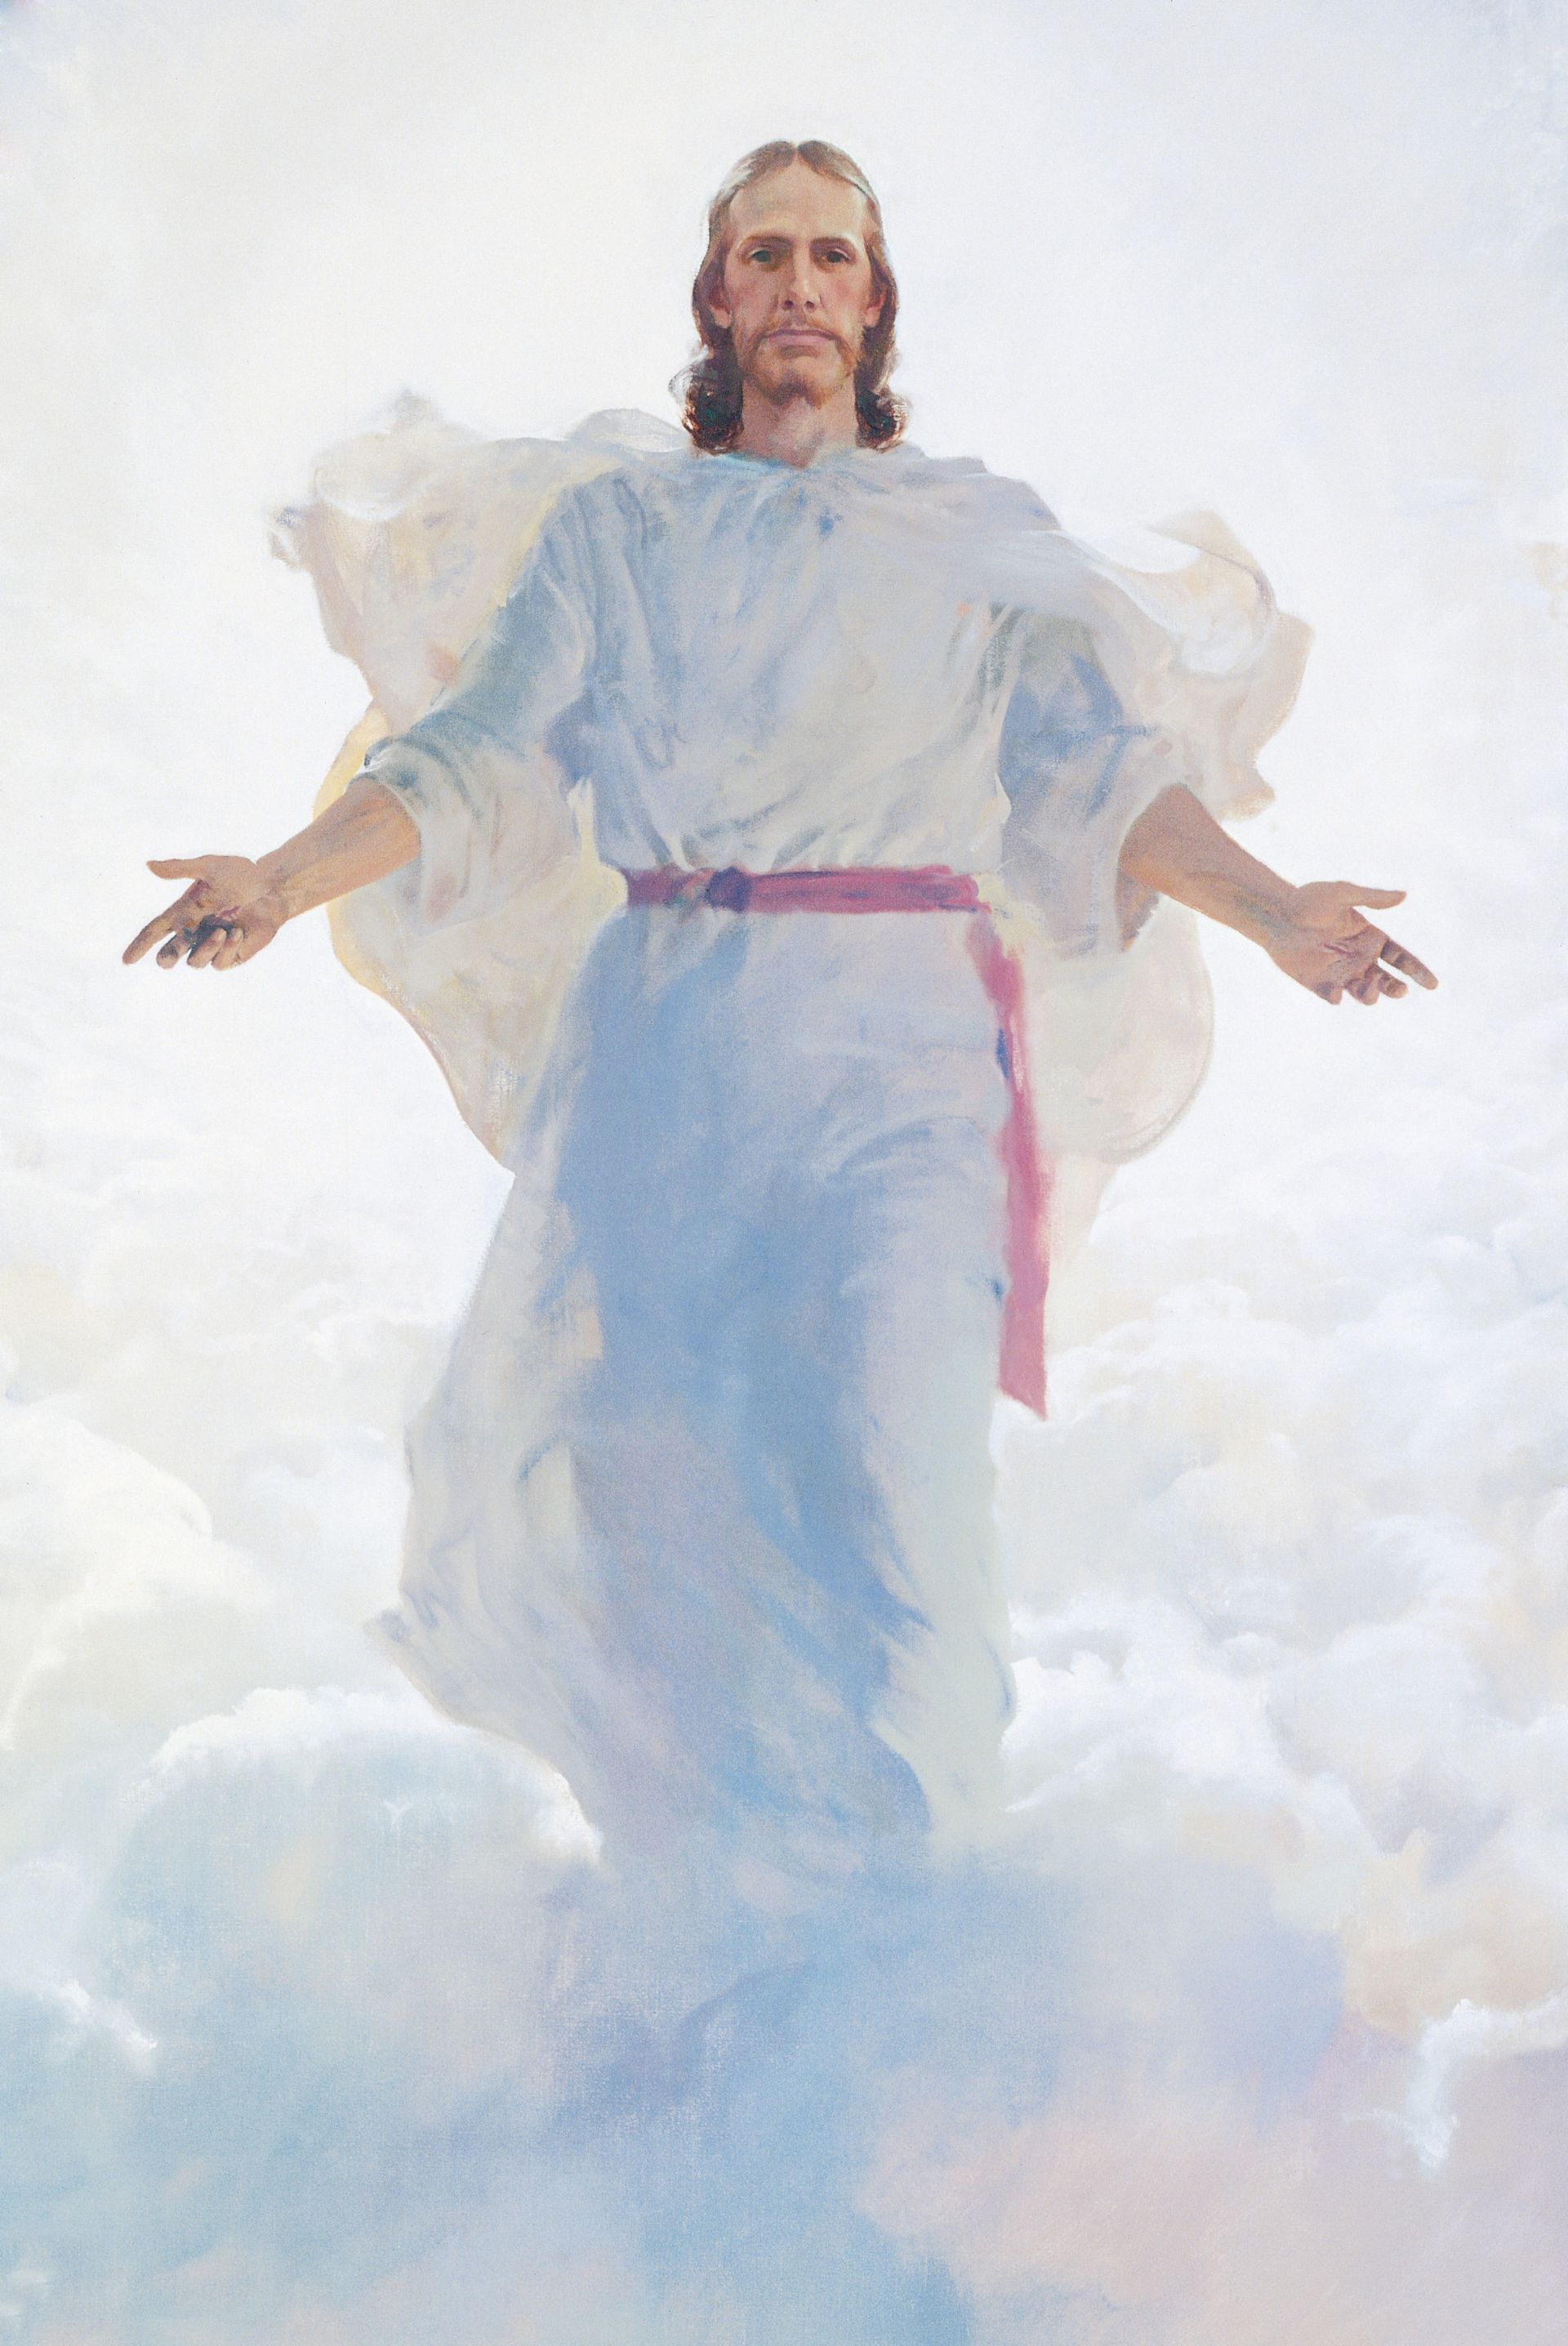 The Resurrected Jesus Christ, by Harry Anderson (62187); GAK 239; Primary manual 2-65; Primary manual 3-15; Primary manual 4-49; Primary manual 6-48; Primary manual 7-37; Primary manual 7-25; Matthew 16:27; 24:30–31; 25:31